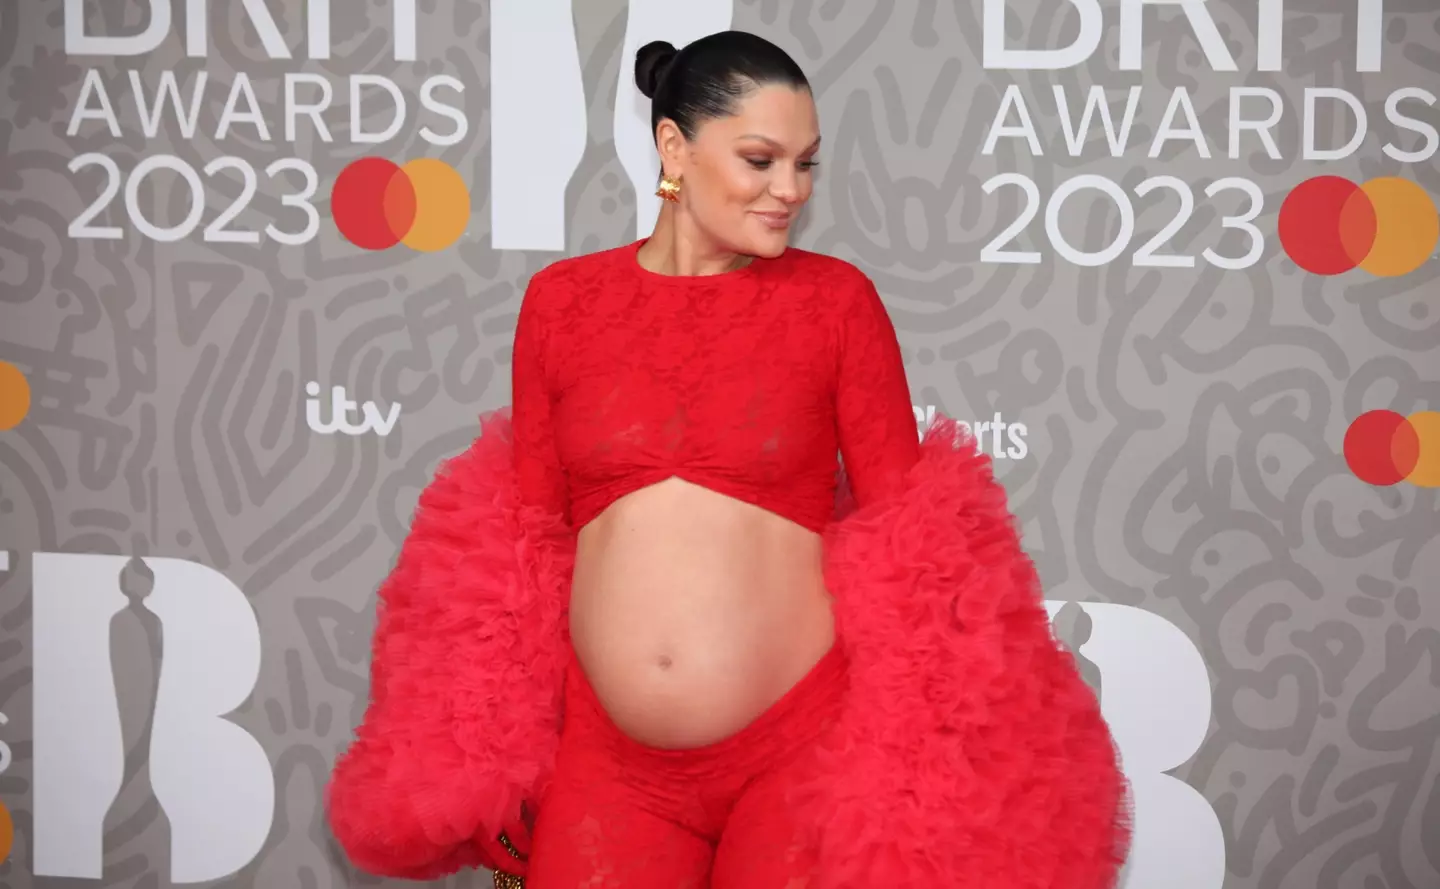 She showed off her bump at the Brits.